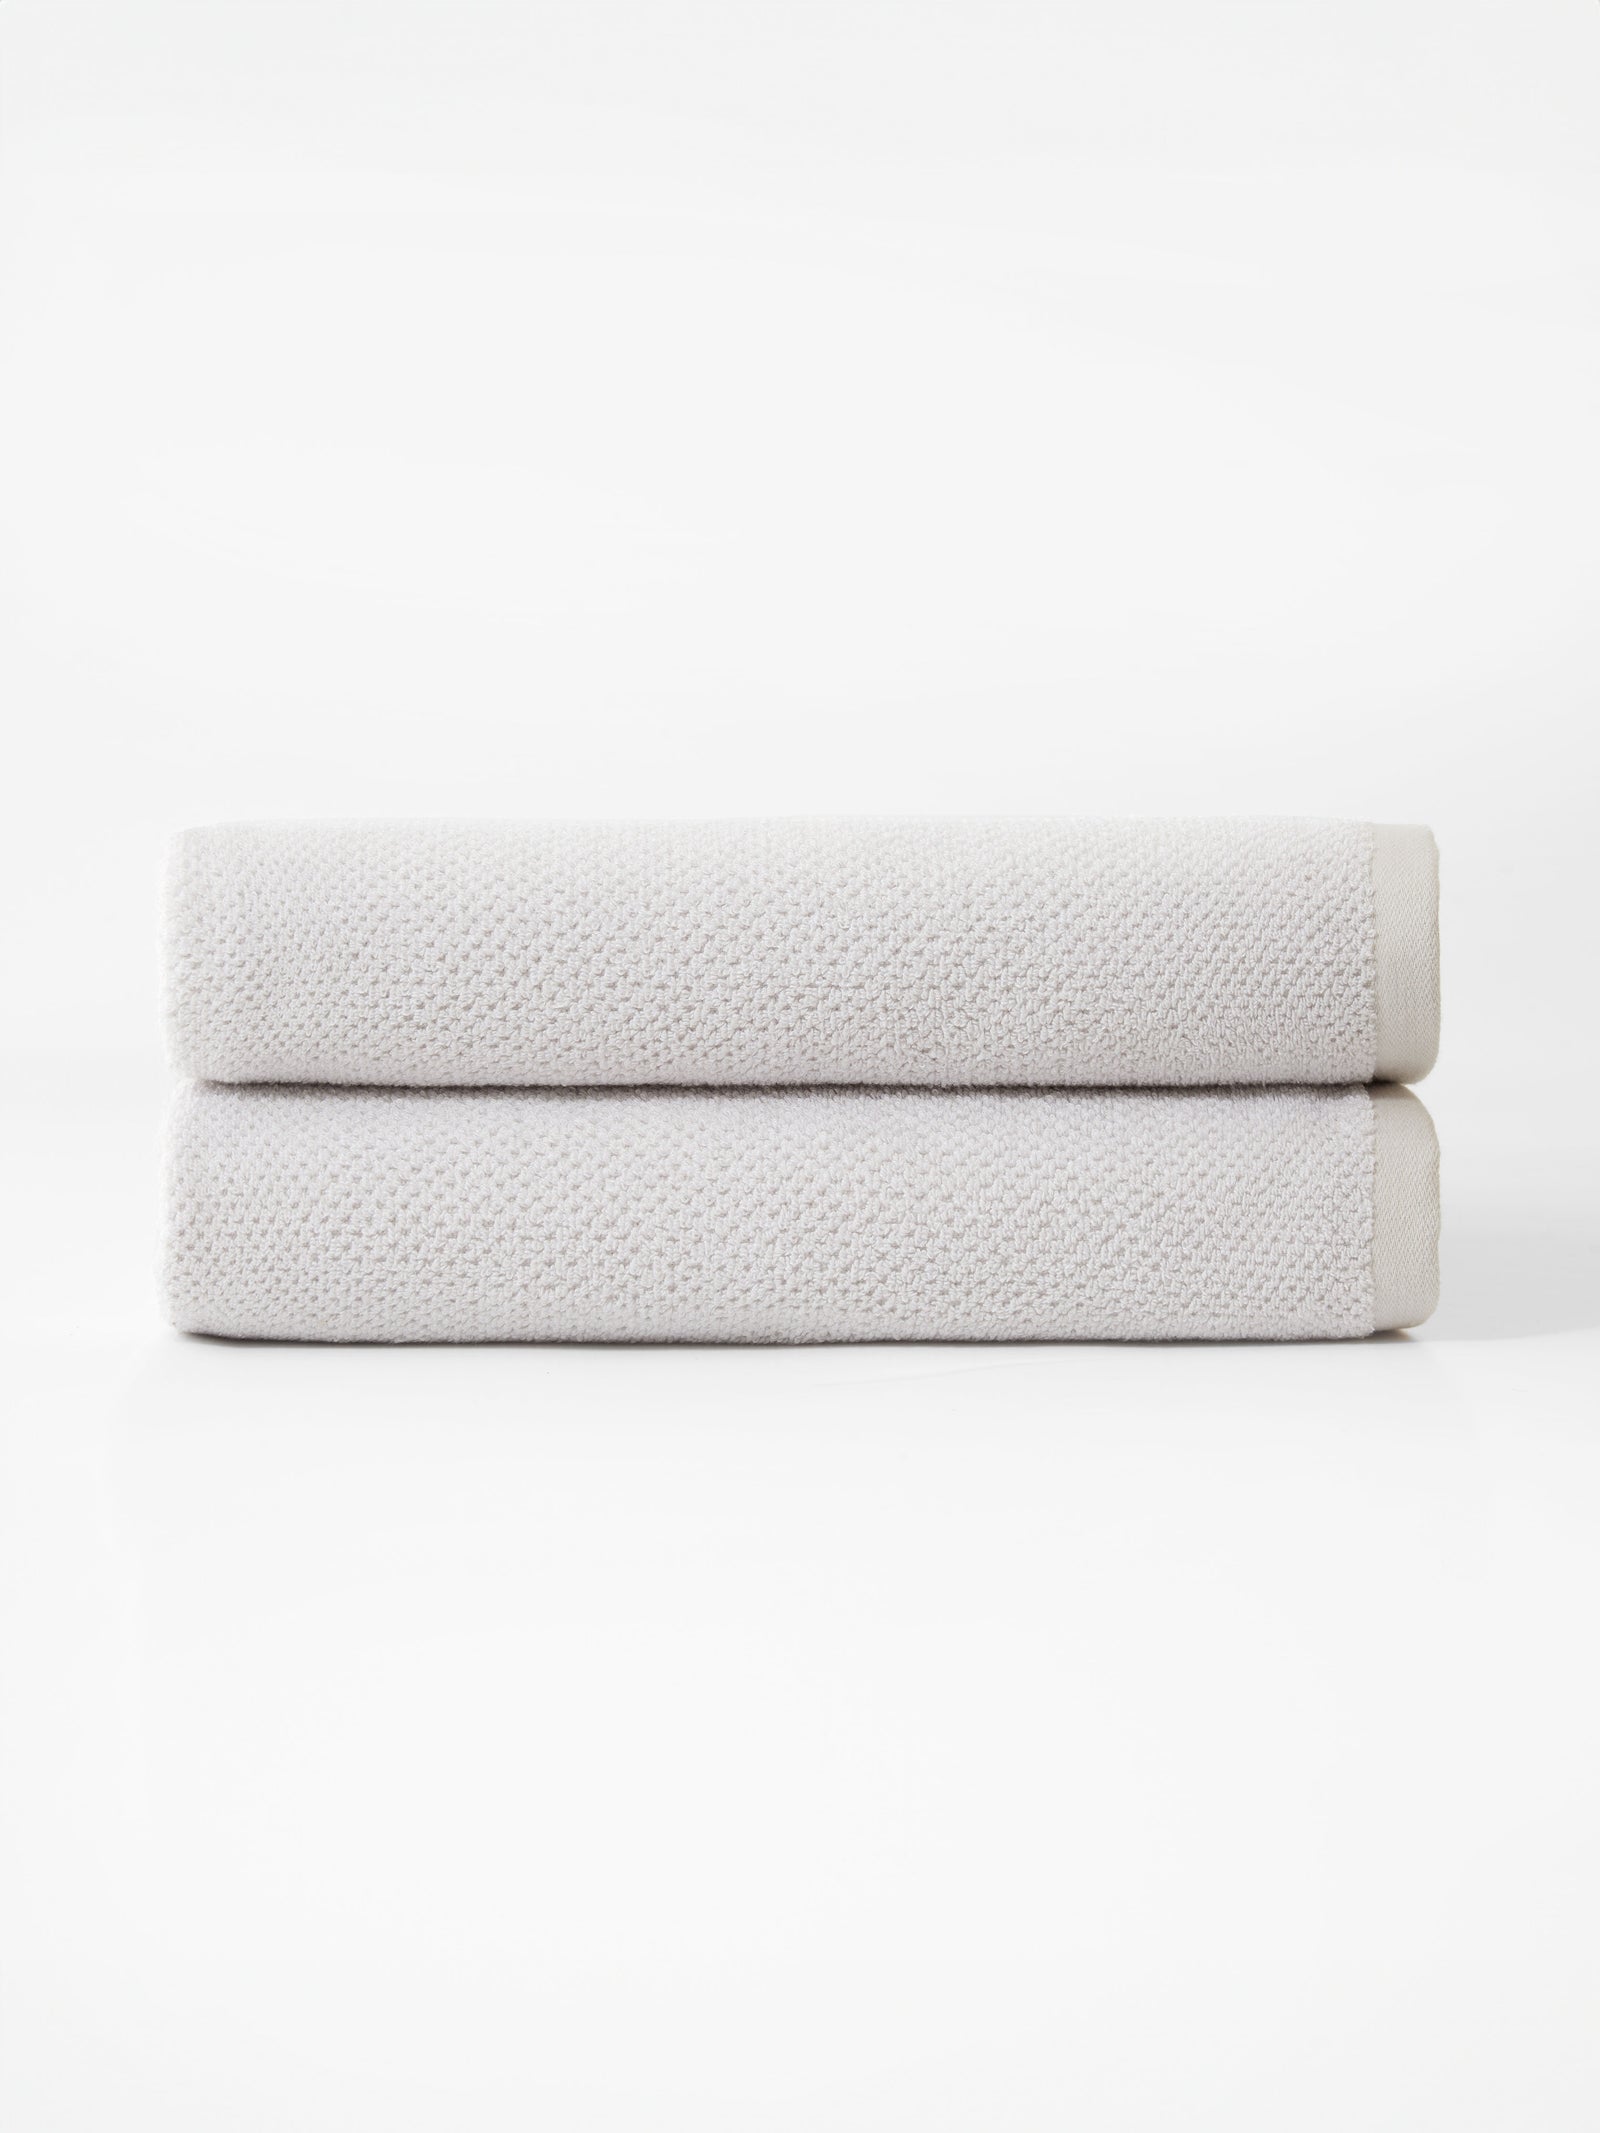 Nantucket Bath Towels in the color Heathered Light Grey. Photo of Nantucket Bath Towels taken with the bath towels on a white background. 